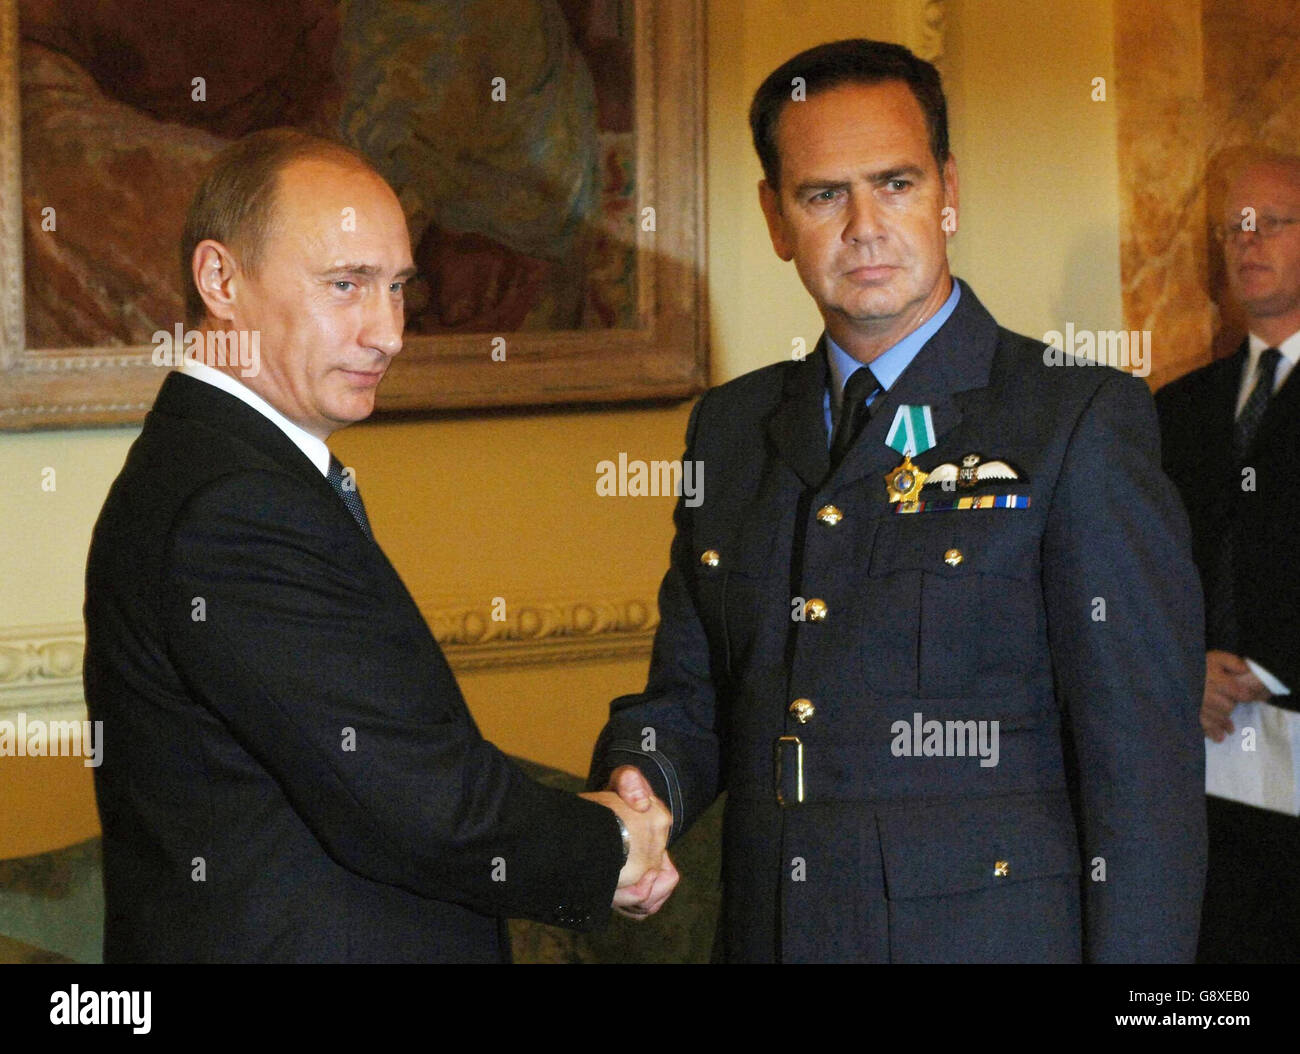 Squadron Leader Keith Hewitt receives the 'Order of Friendship' from Russian President Vladimir Putin at Downing Street, Wednesday October 5, 2005, for his part in freeing the Russian submersible, AS28 Priz in August. See PA Story DEFENCE Putin. PRESS ASSOCIATION Photo. Photo credit should read: Stefan Rousseau/PA/WPA Rota Stock Photo